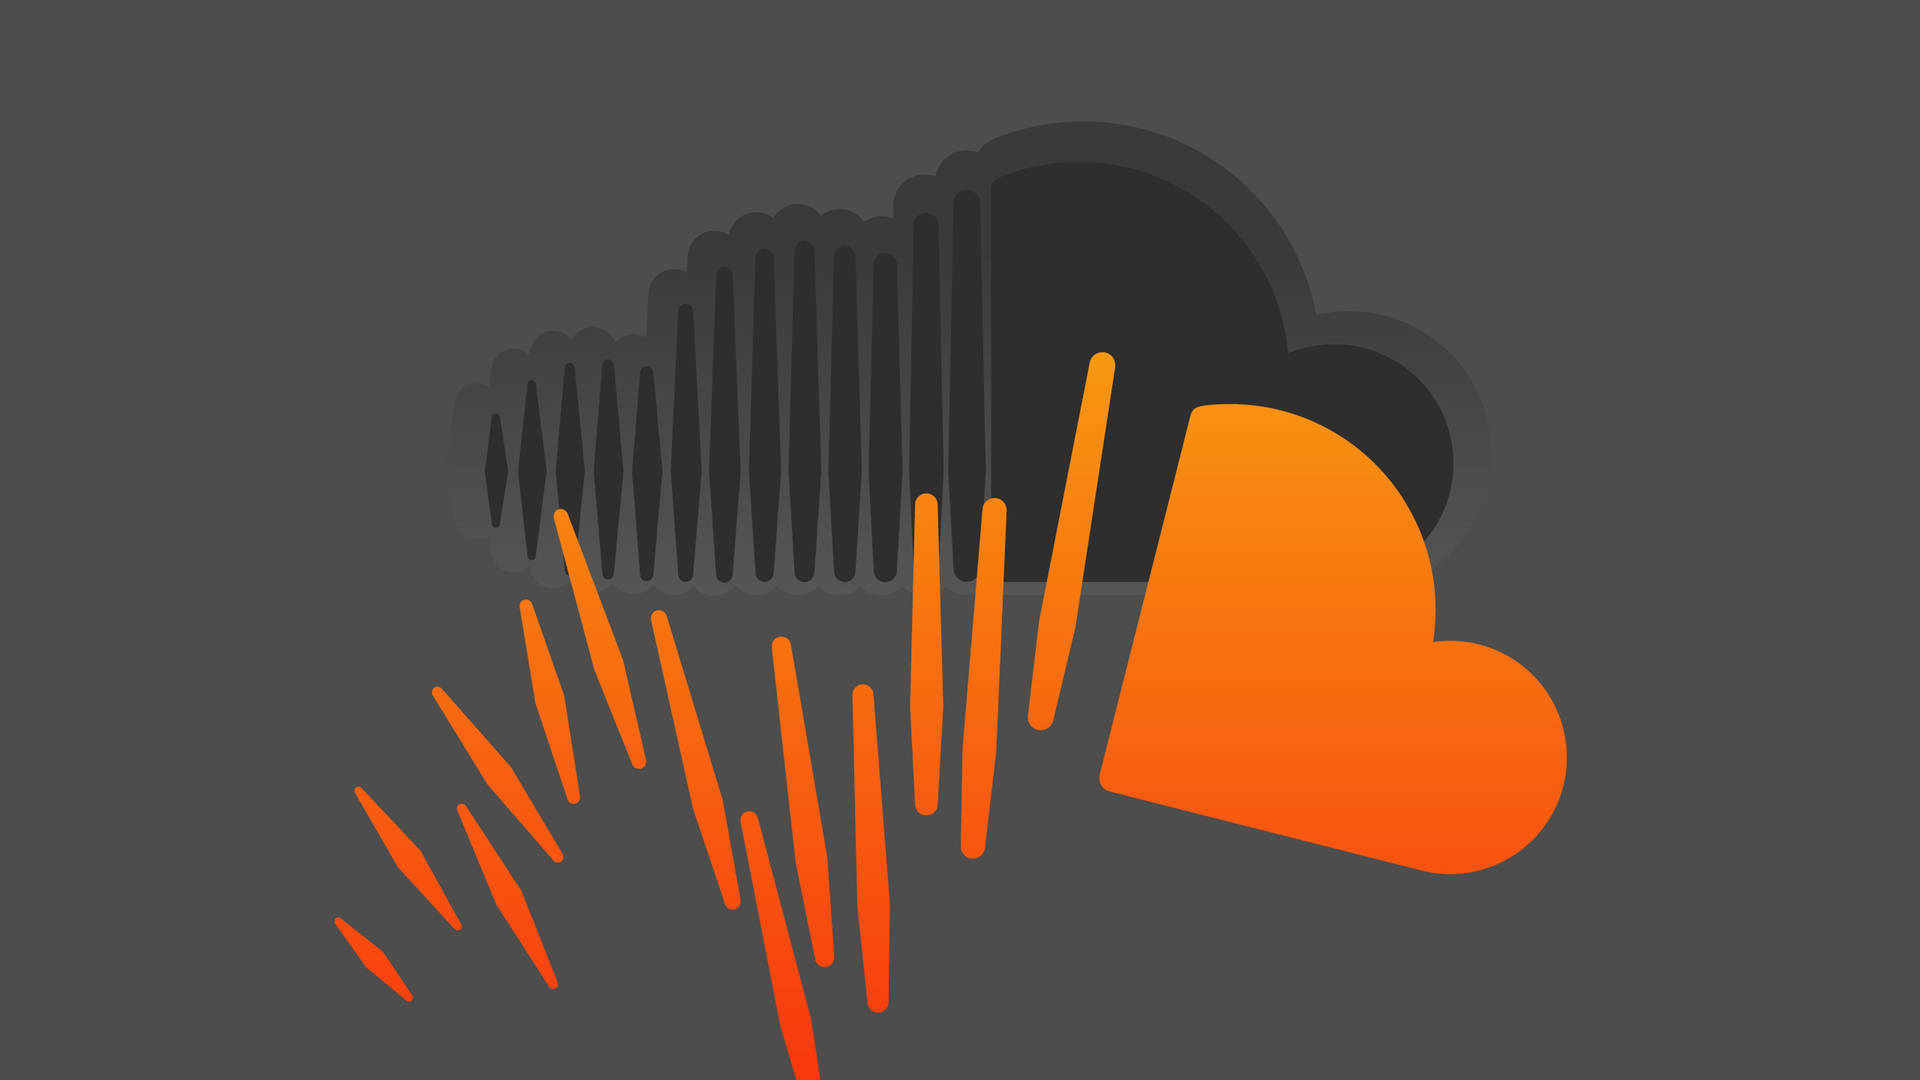 Soundcloud Music Streaming Art Background